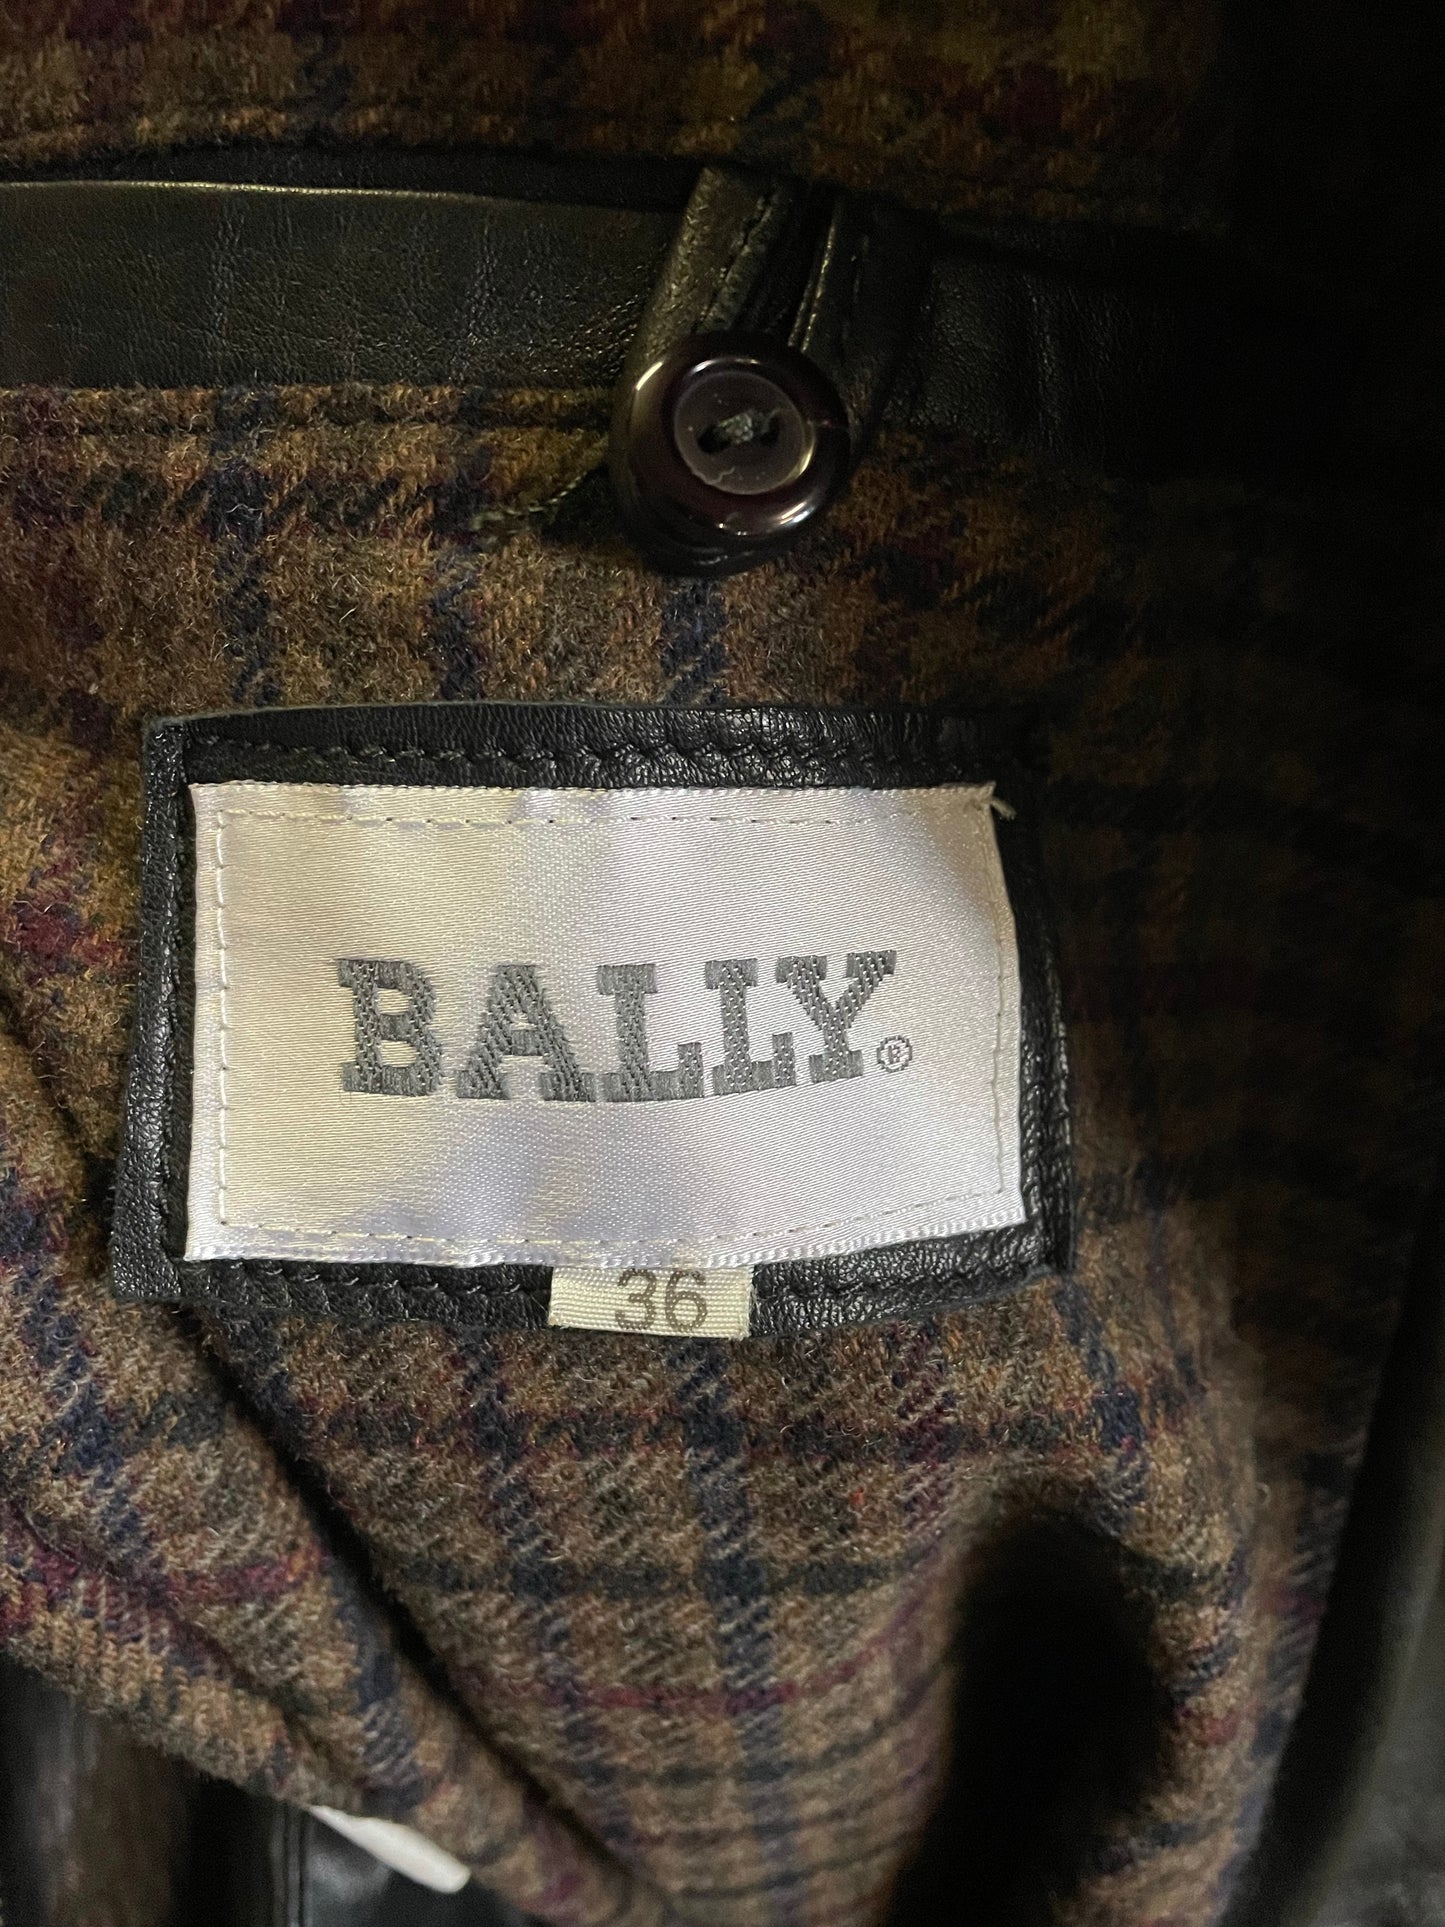 Bally Belted Leather Jacket